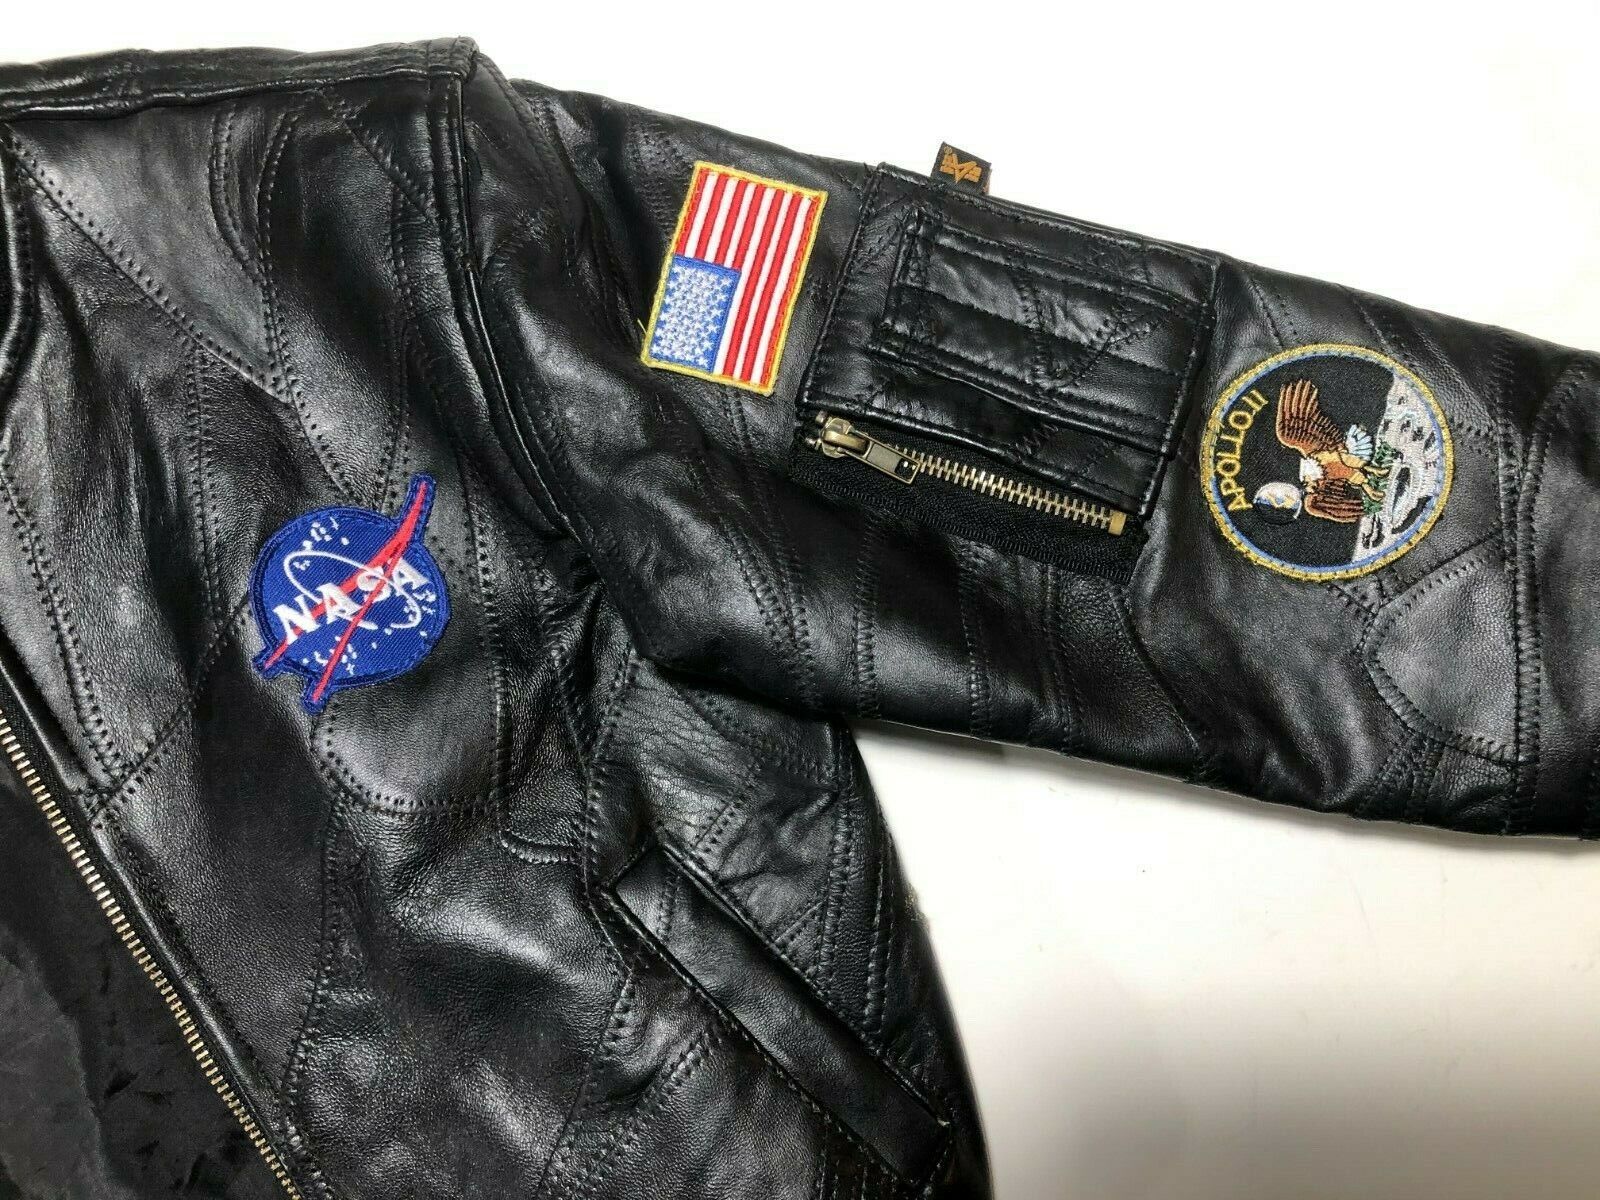 [Teures Material] Leather NASA Bomber Aviator - - Alpha - Size | Industries eBay 4T Jacket RARE Black